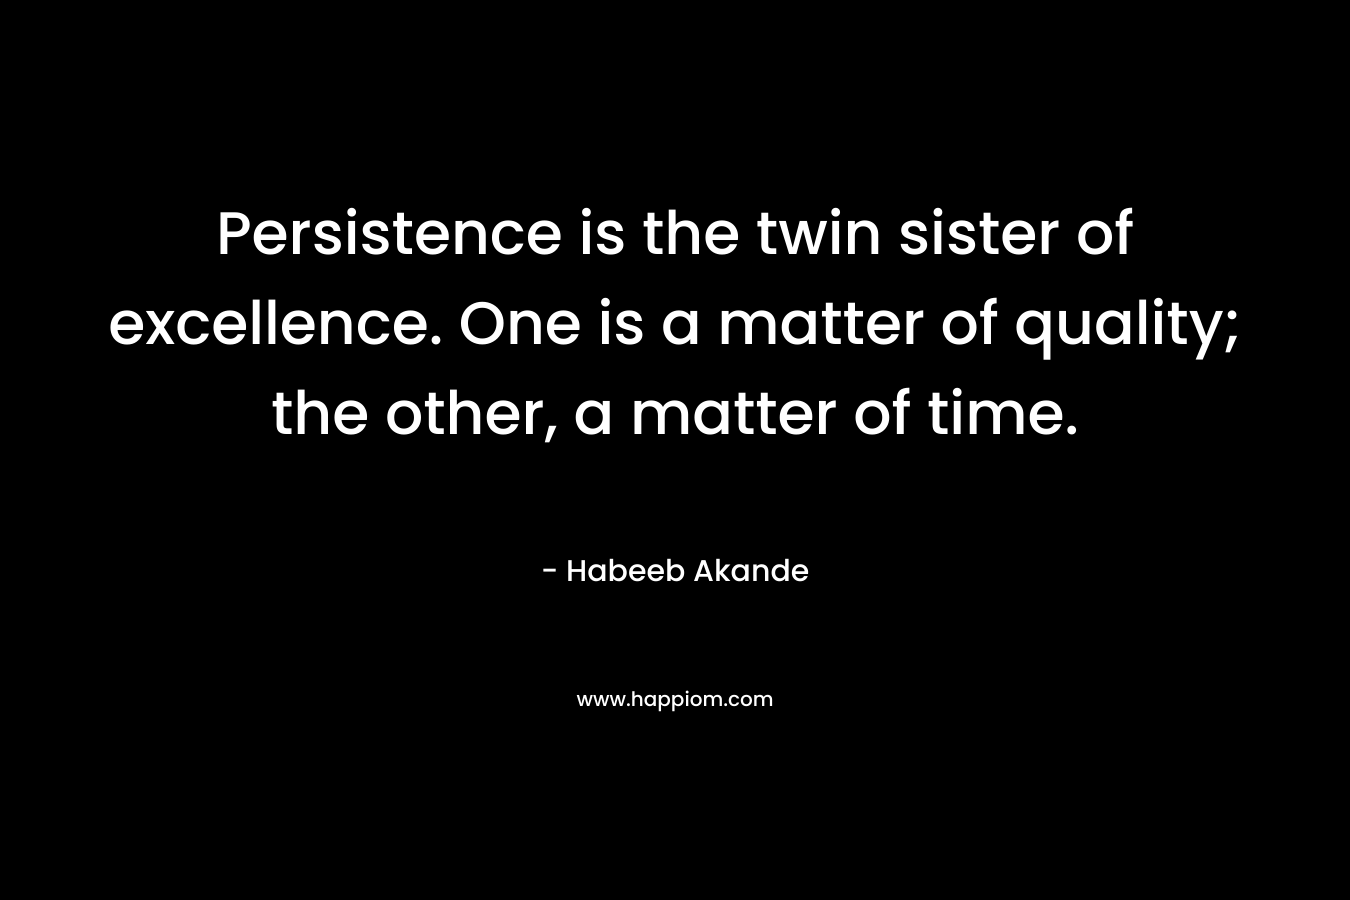 Persistence is the twin sister of excellence. One is a matter of quality; the other, a matter of time. – Habeeb Akande